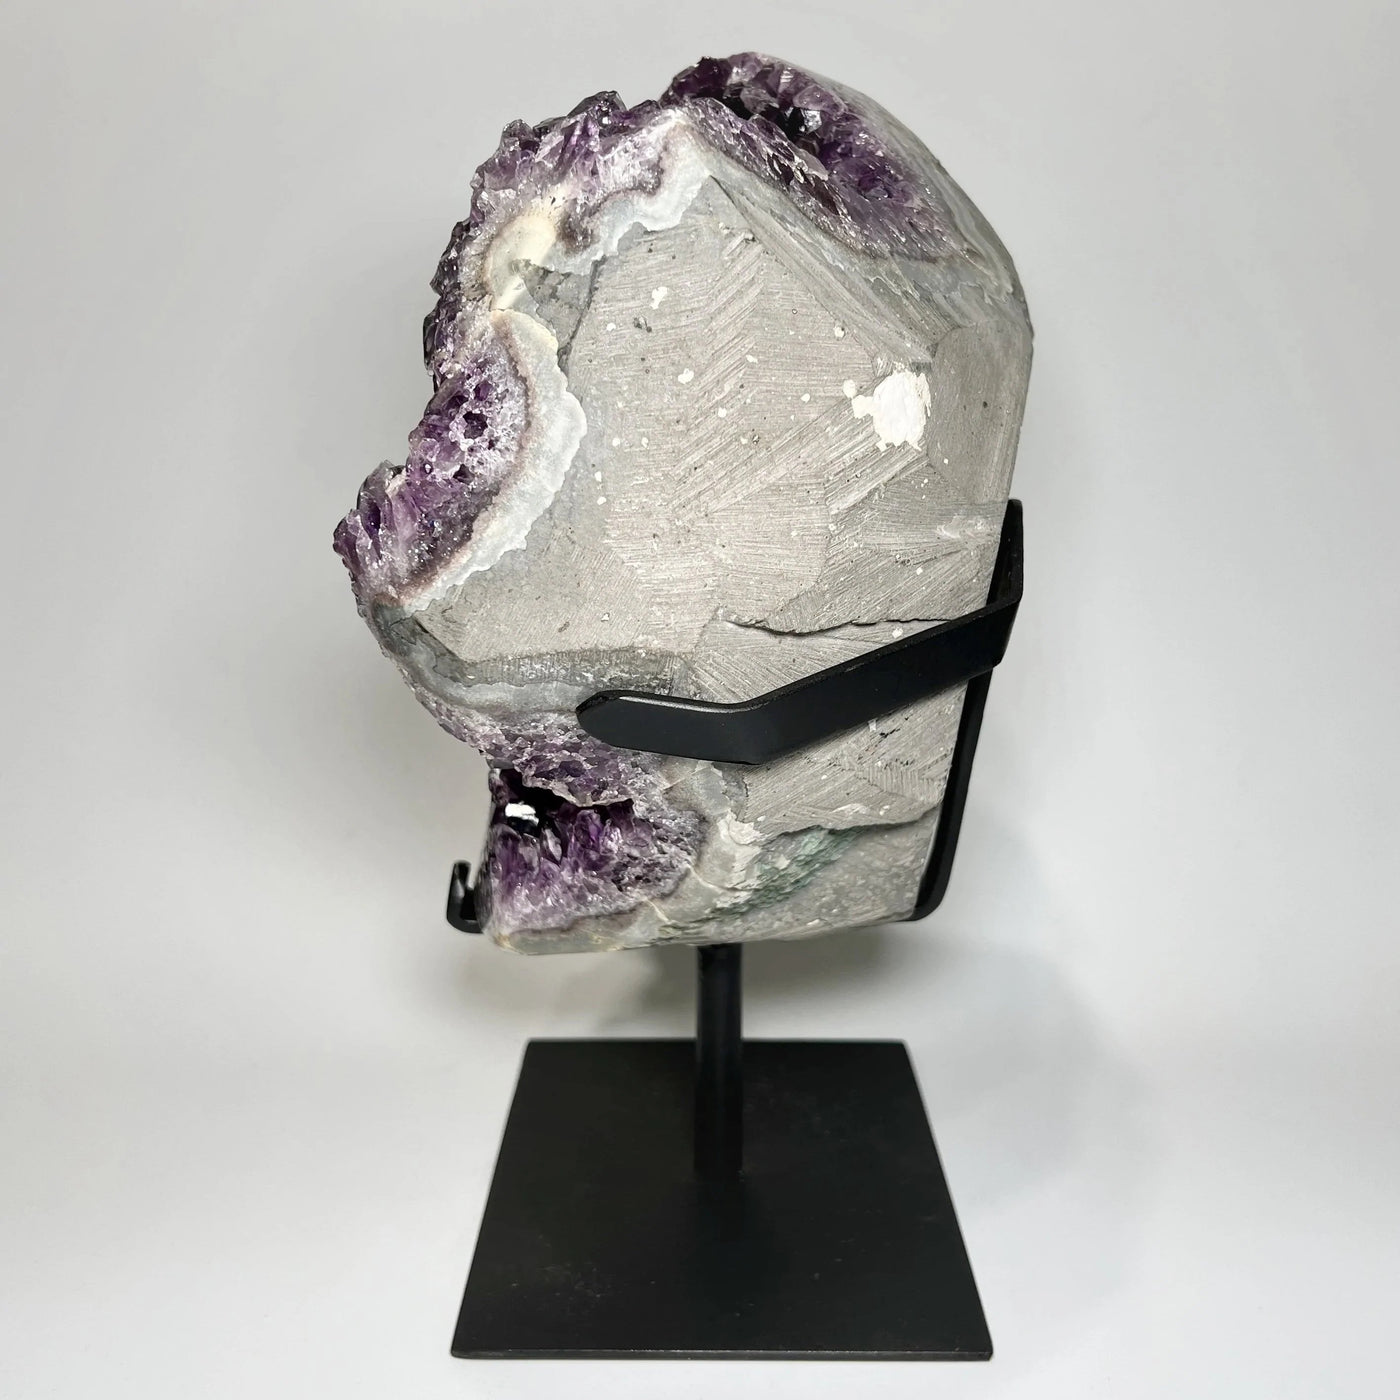 Large Amethyst Druze Cluster on Display Stand